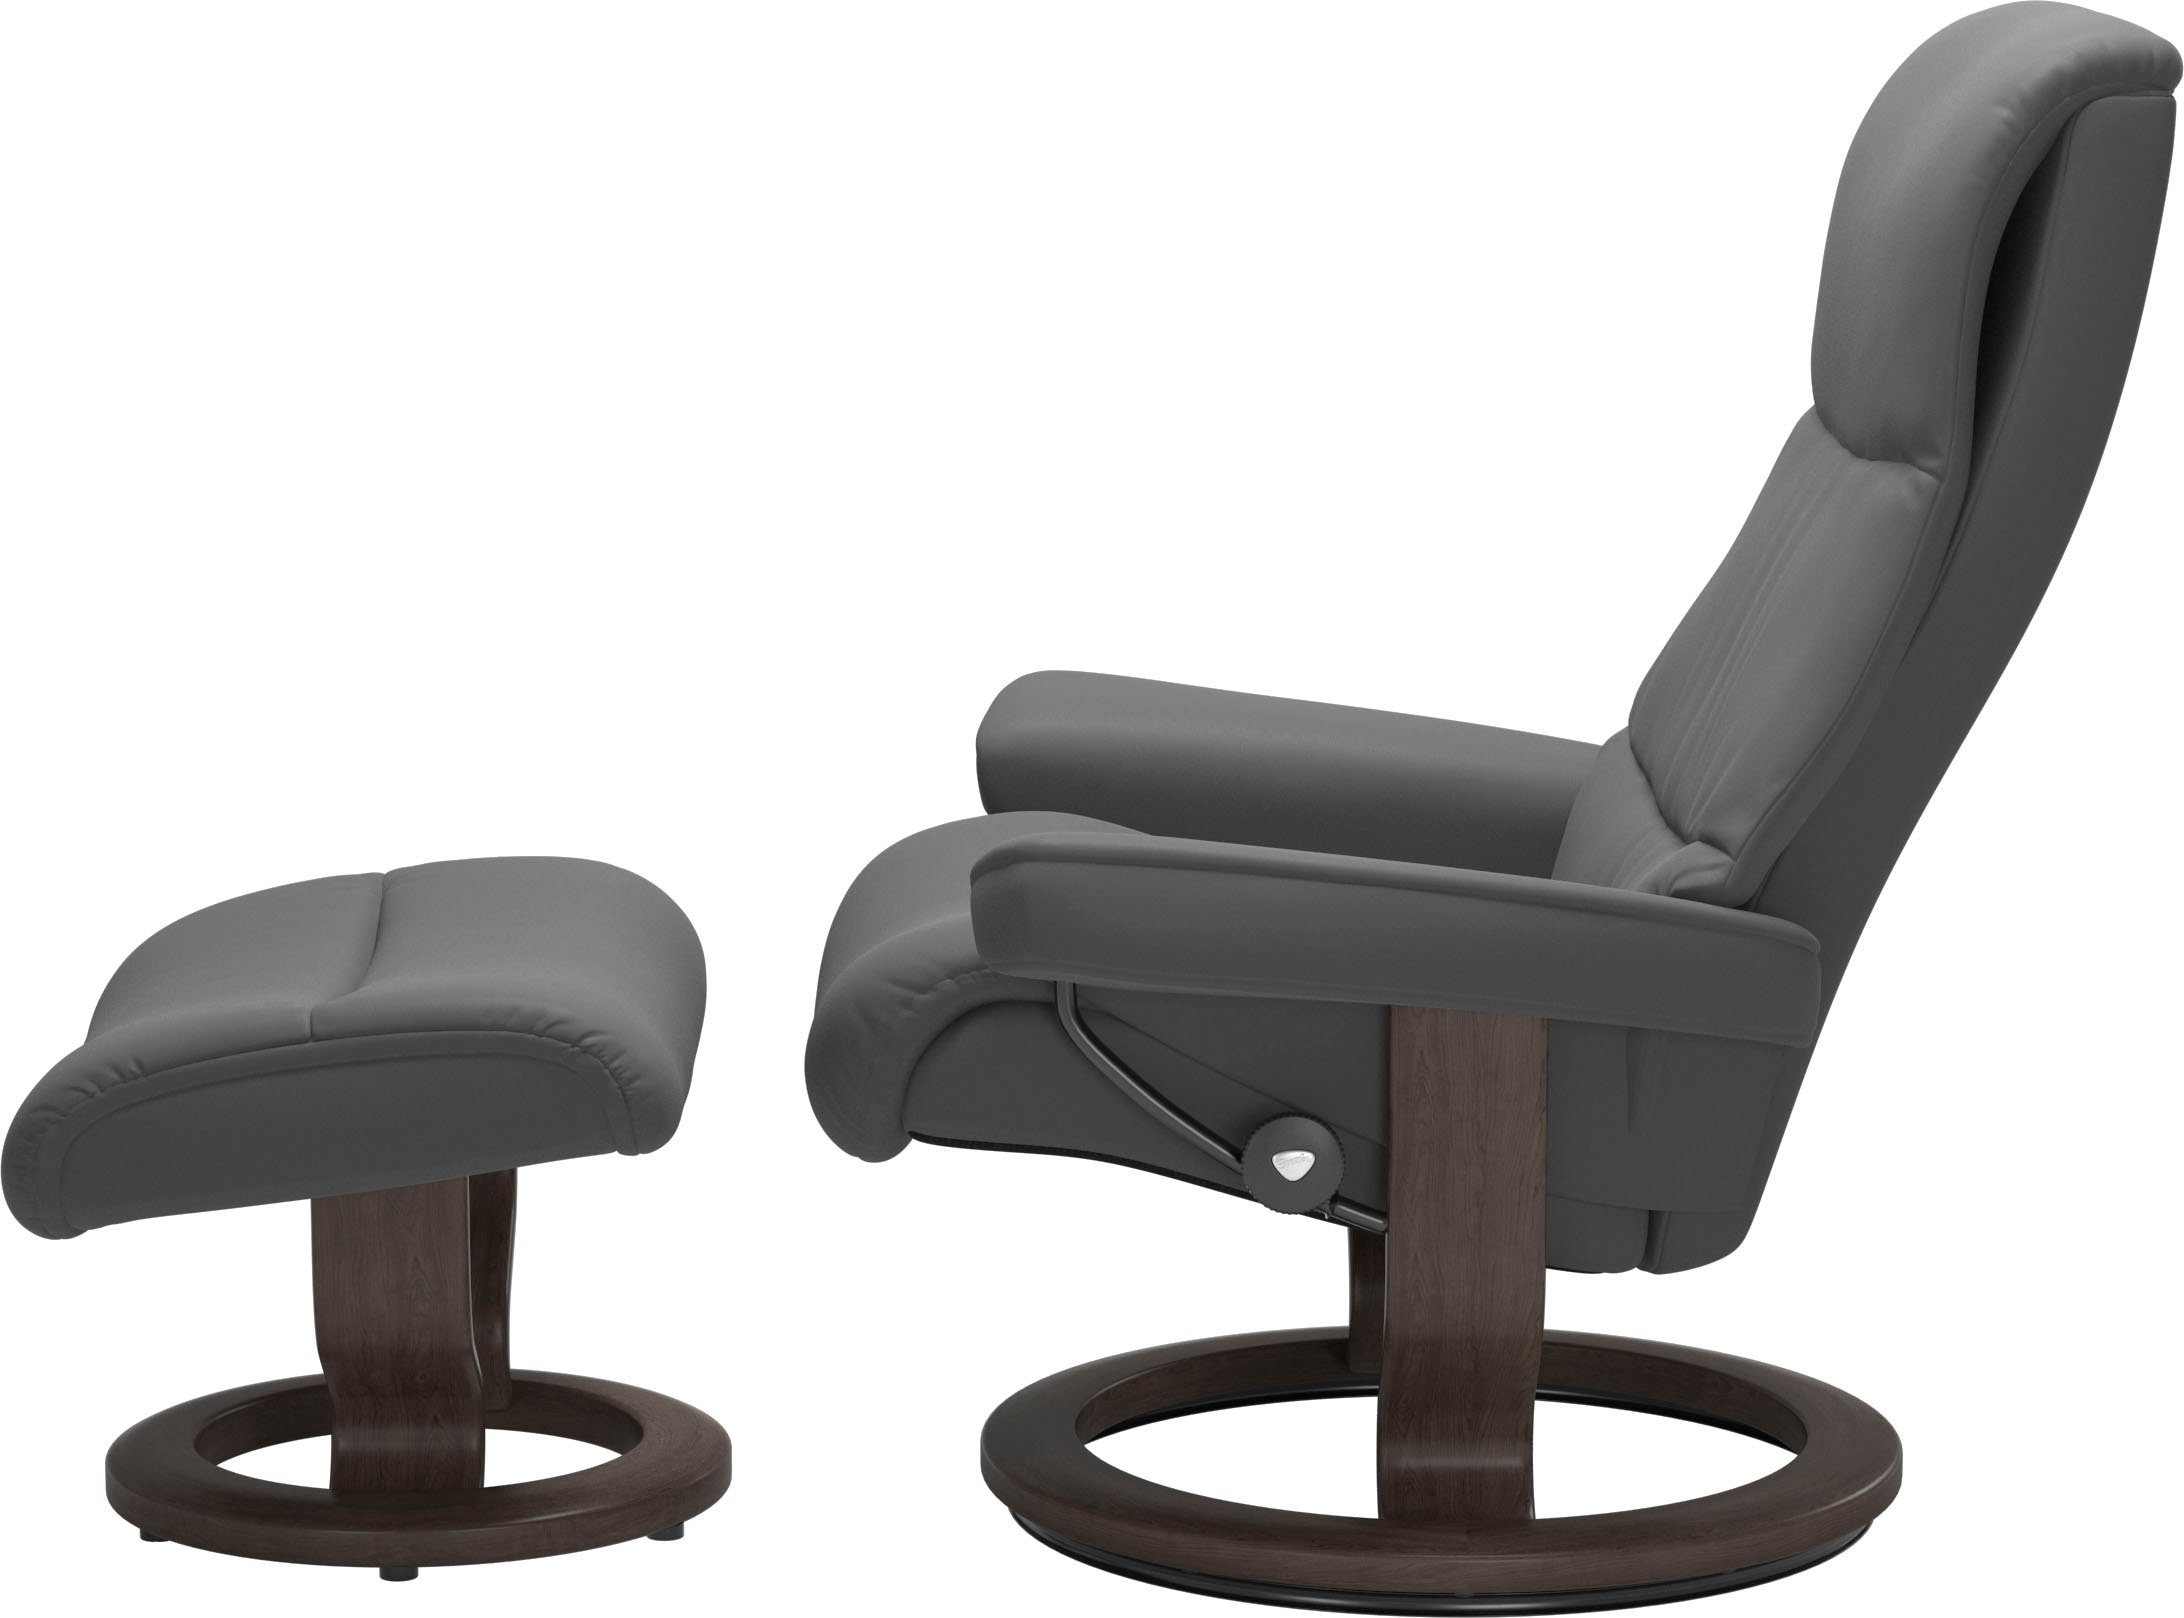 Wenge View, Stressless® M,Gestell Classic Base, Größe Relaxsessel mit